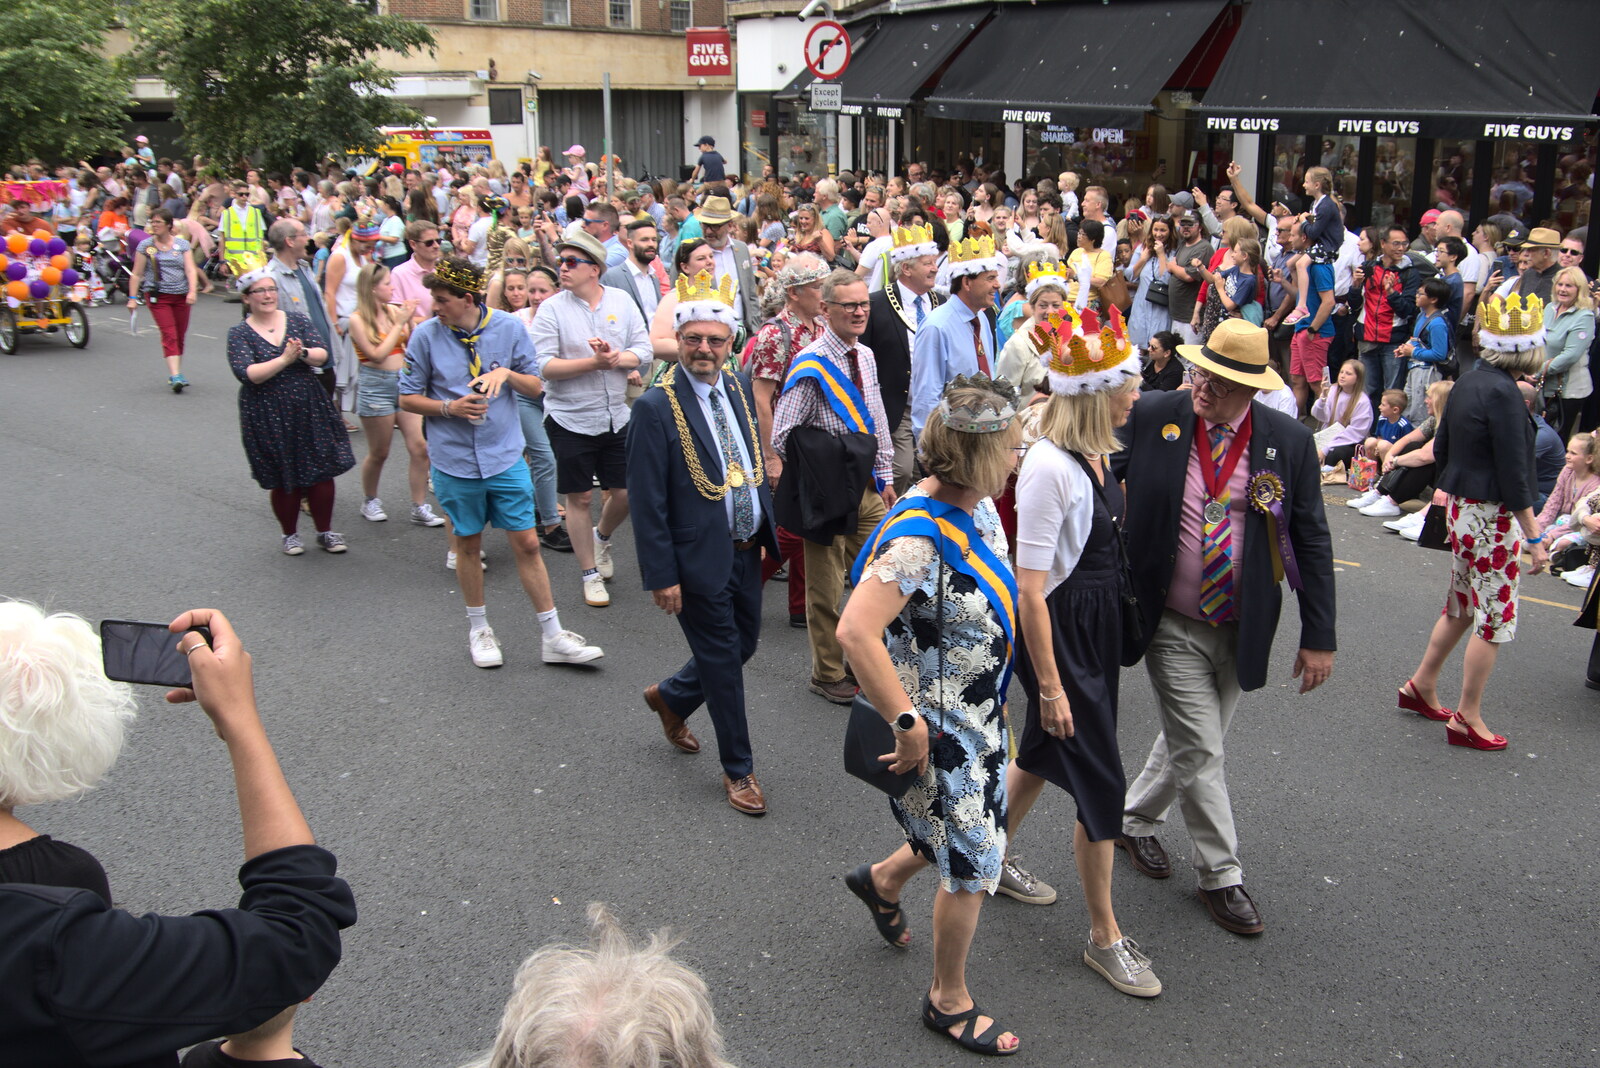 More dignitiaries in the parade from The Lord Mayor's Procession, Norwich, Norfolk - 2nd July 2022